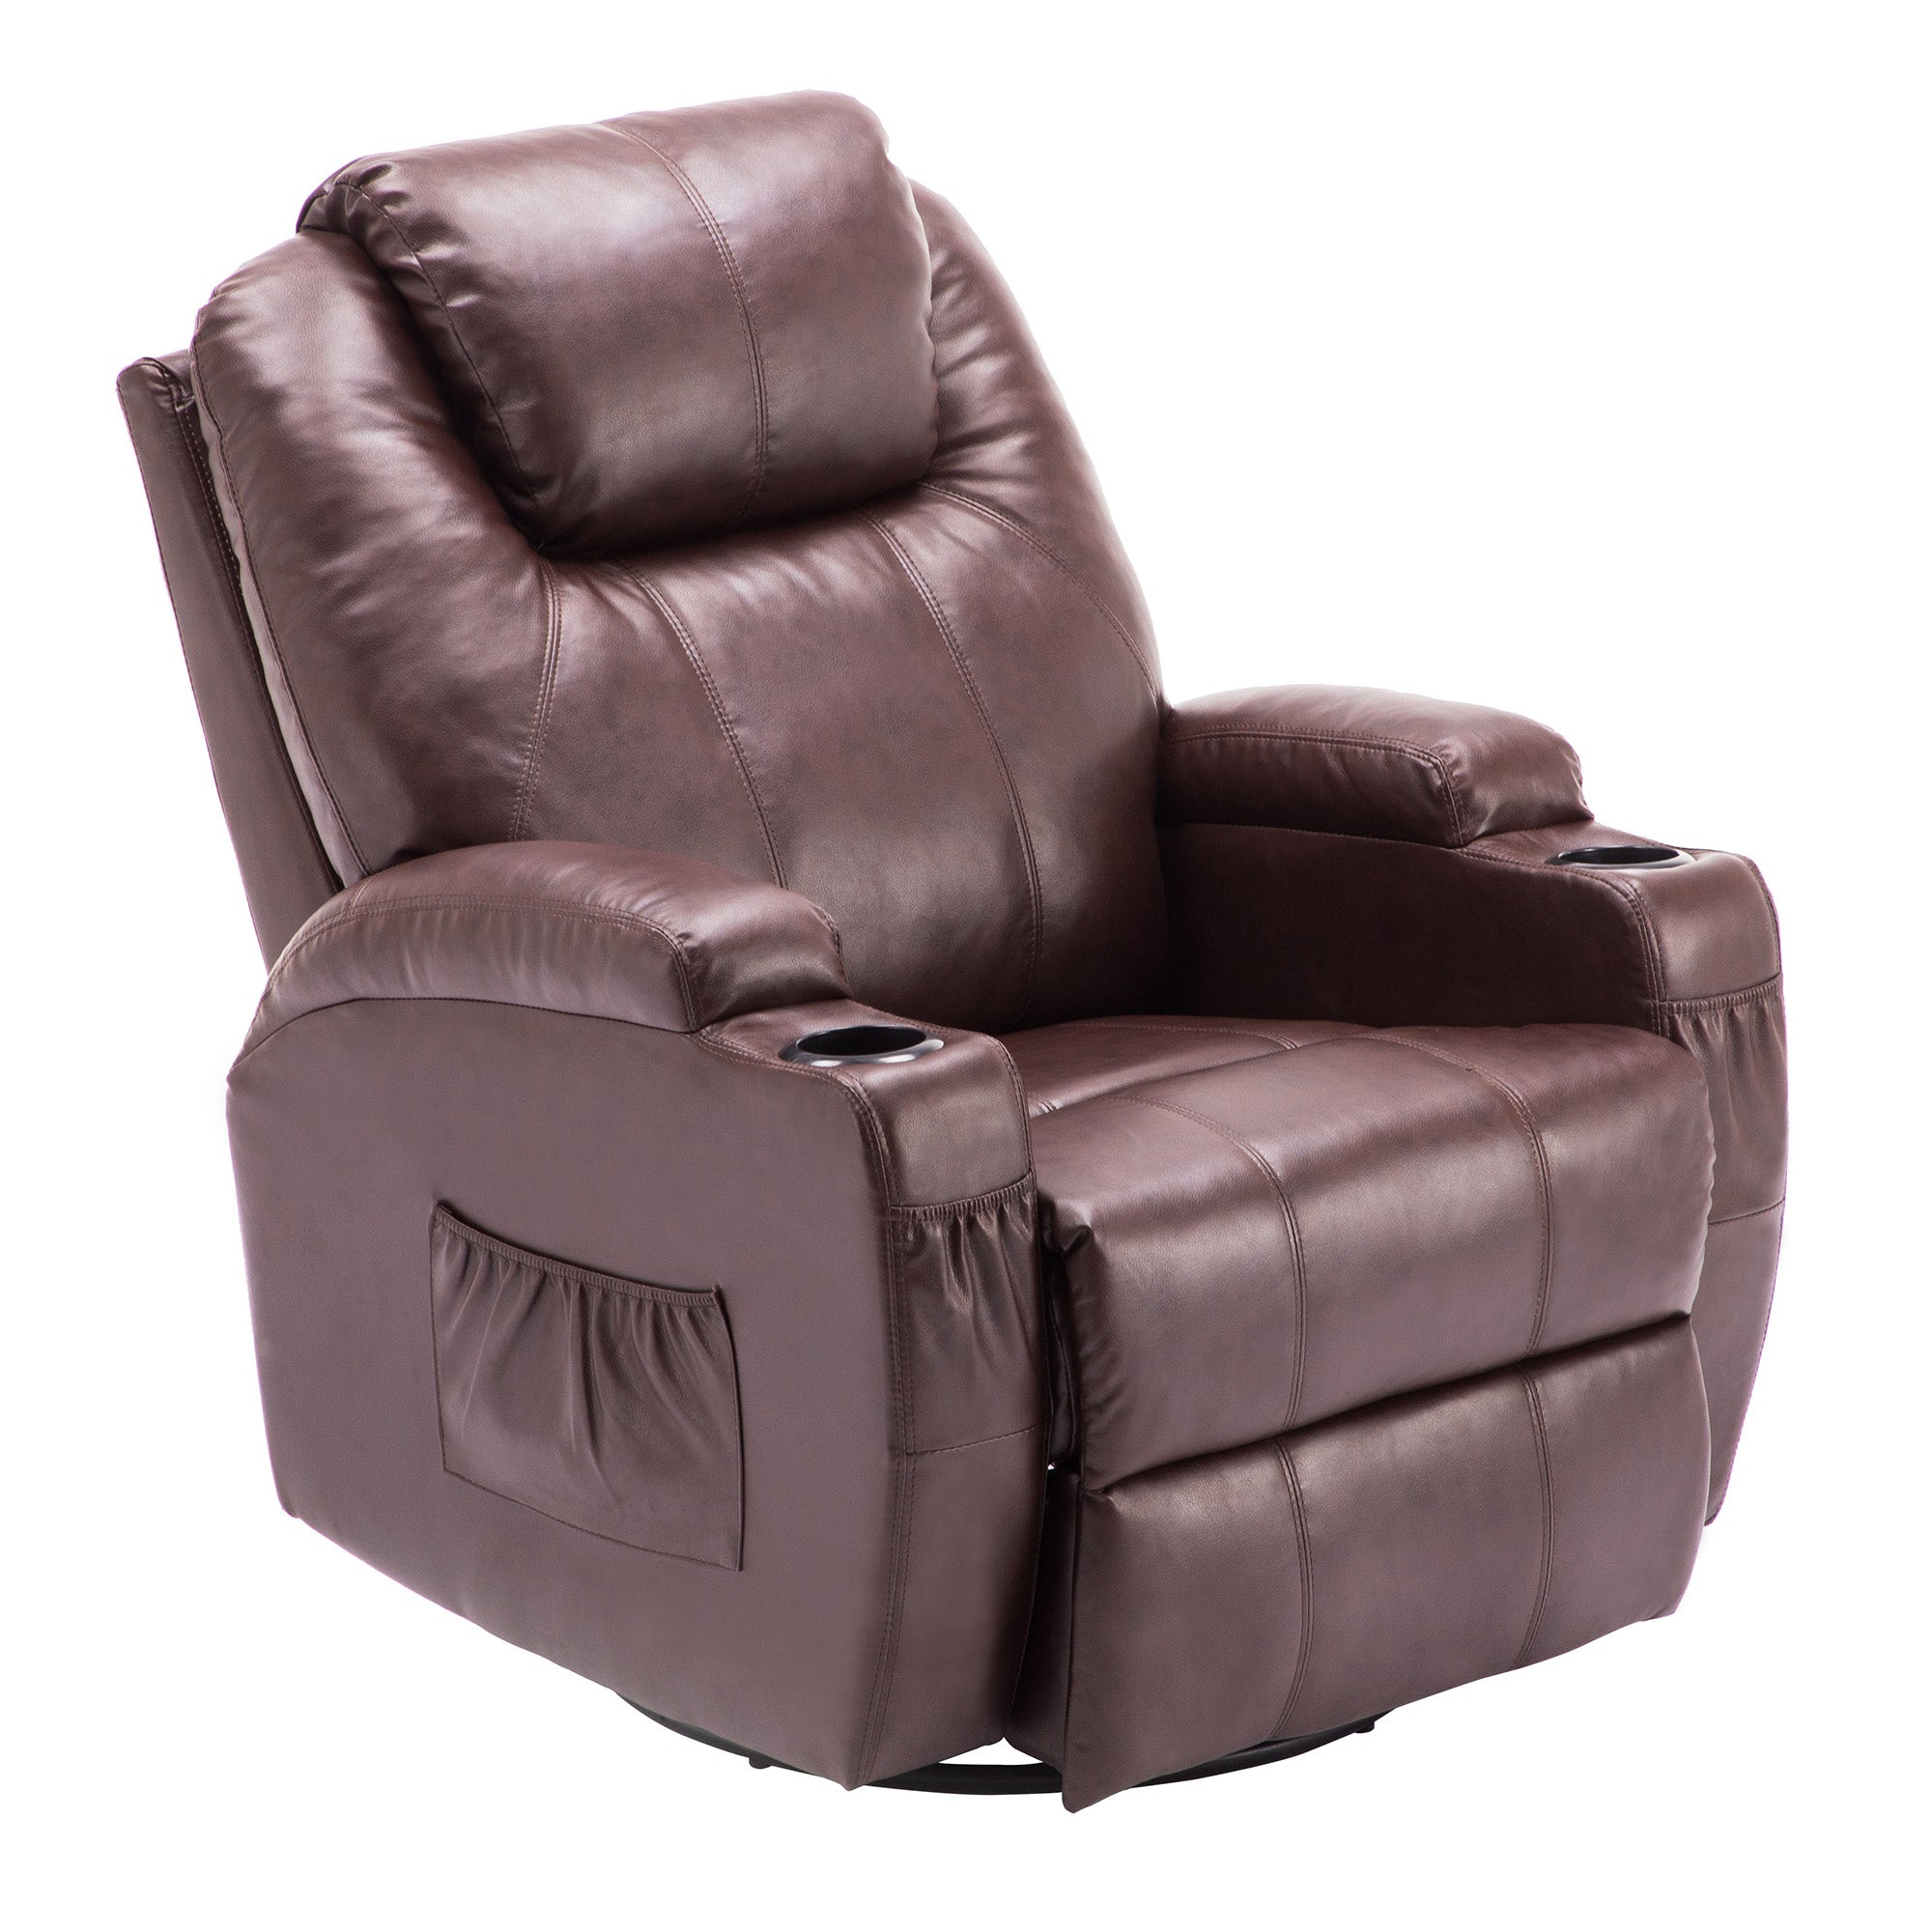 MCombo Manual Swivel Glider Rocker Recliner Chair with Massage and Heat for Adult, Cup Holders, USB Ports, 2 Side Pockets 8031,8041